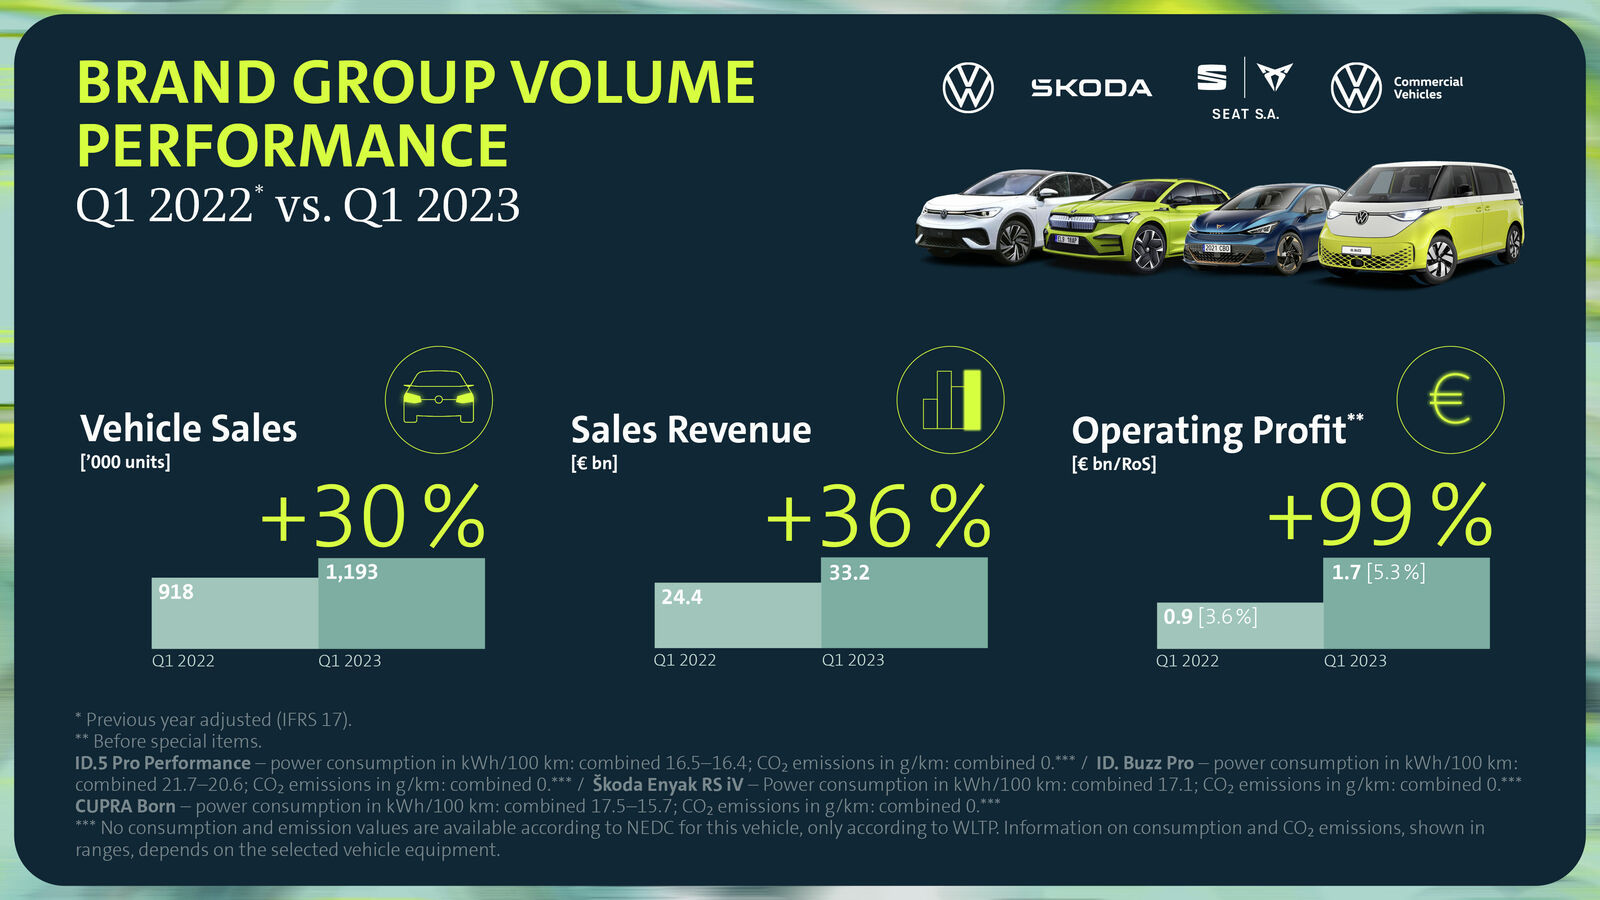 Volkswagen: Brand Group Volume doubles operating profit in first quarter 2023